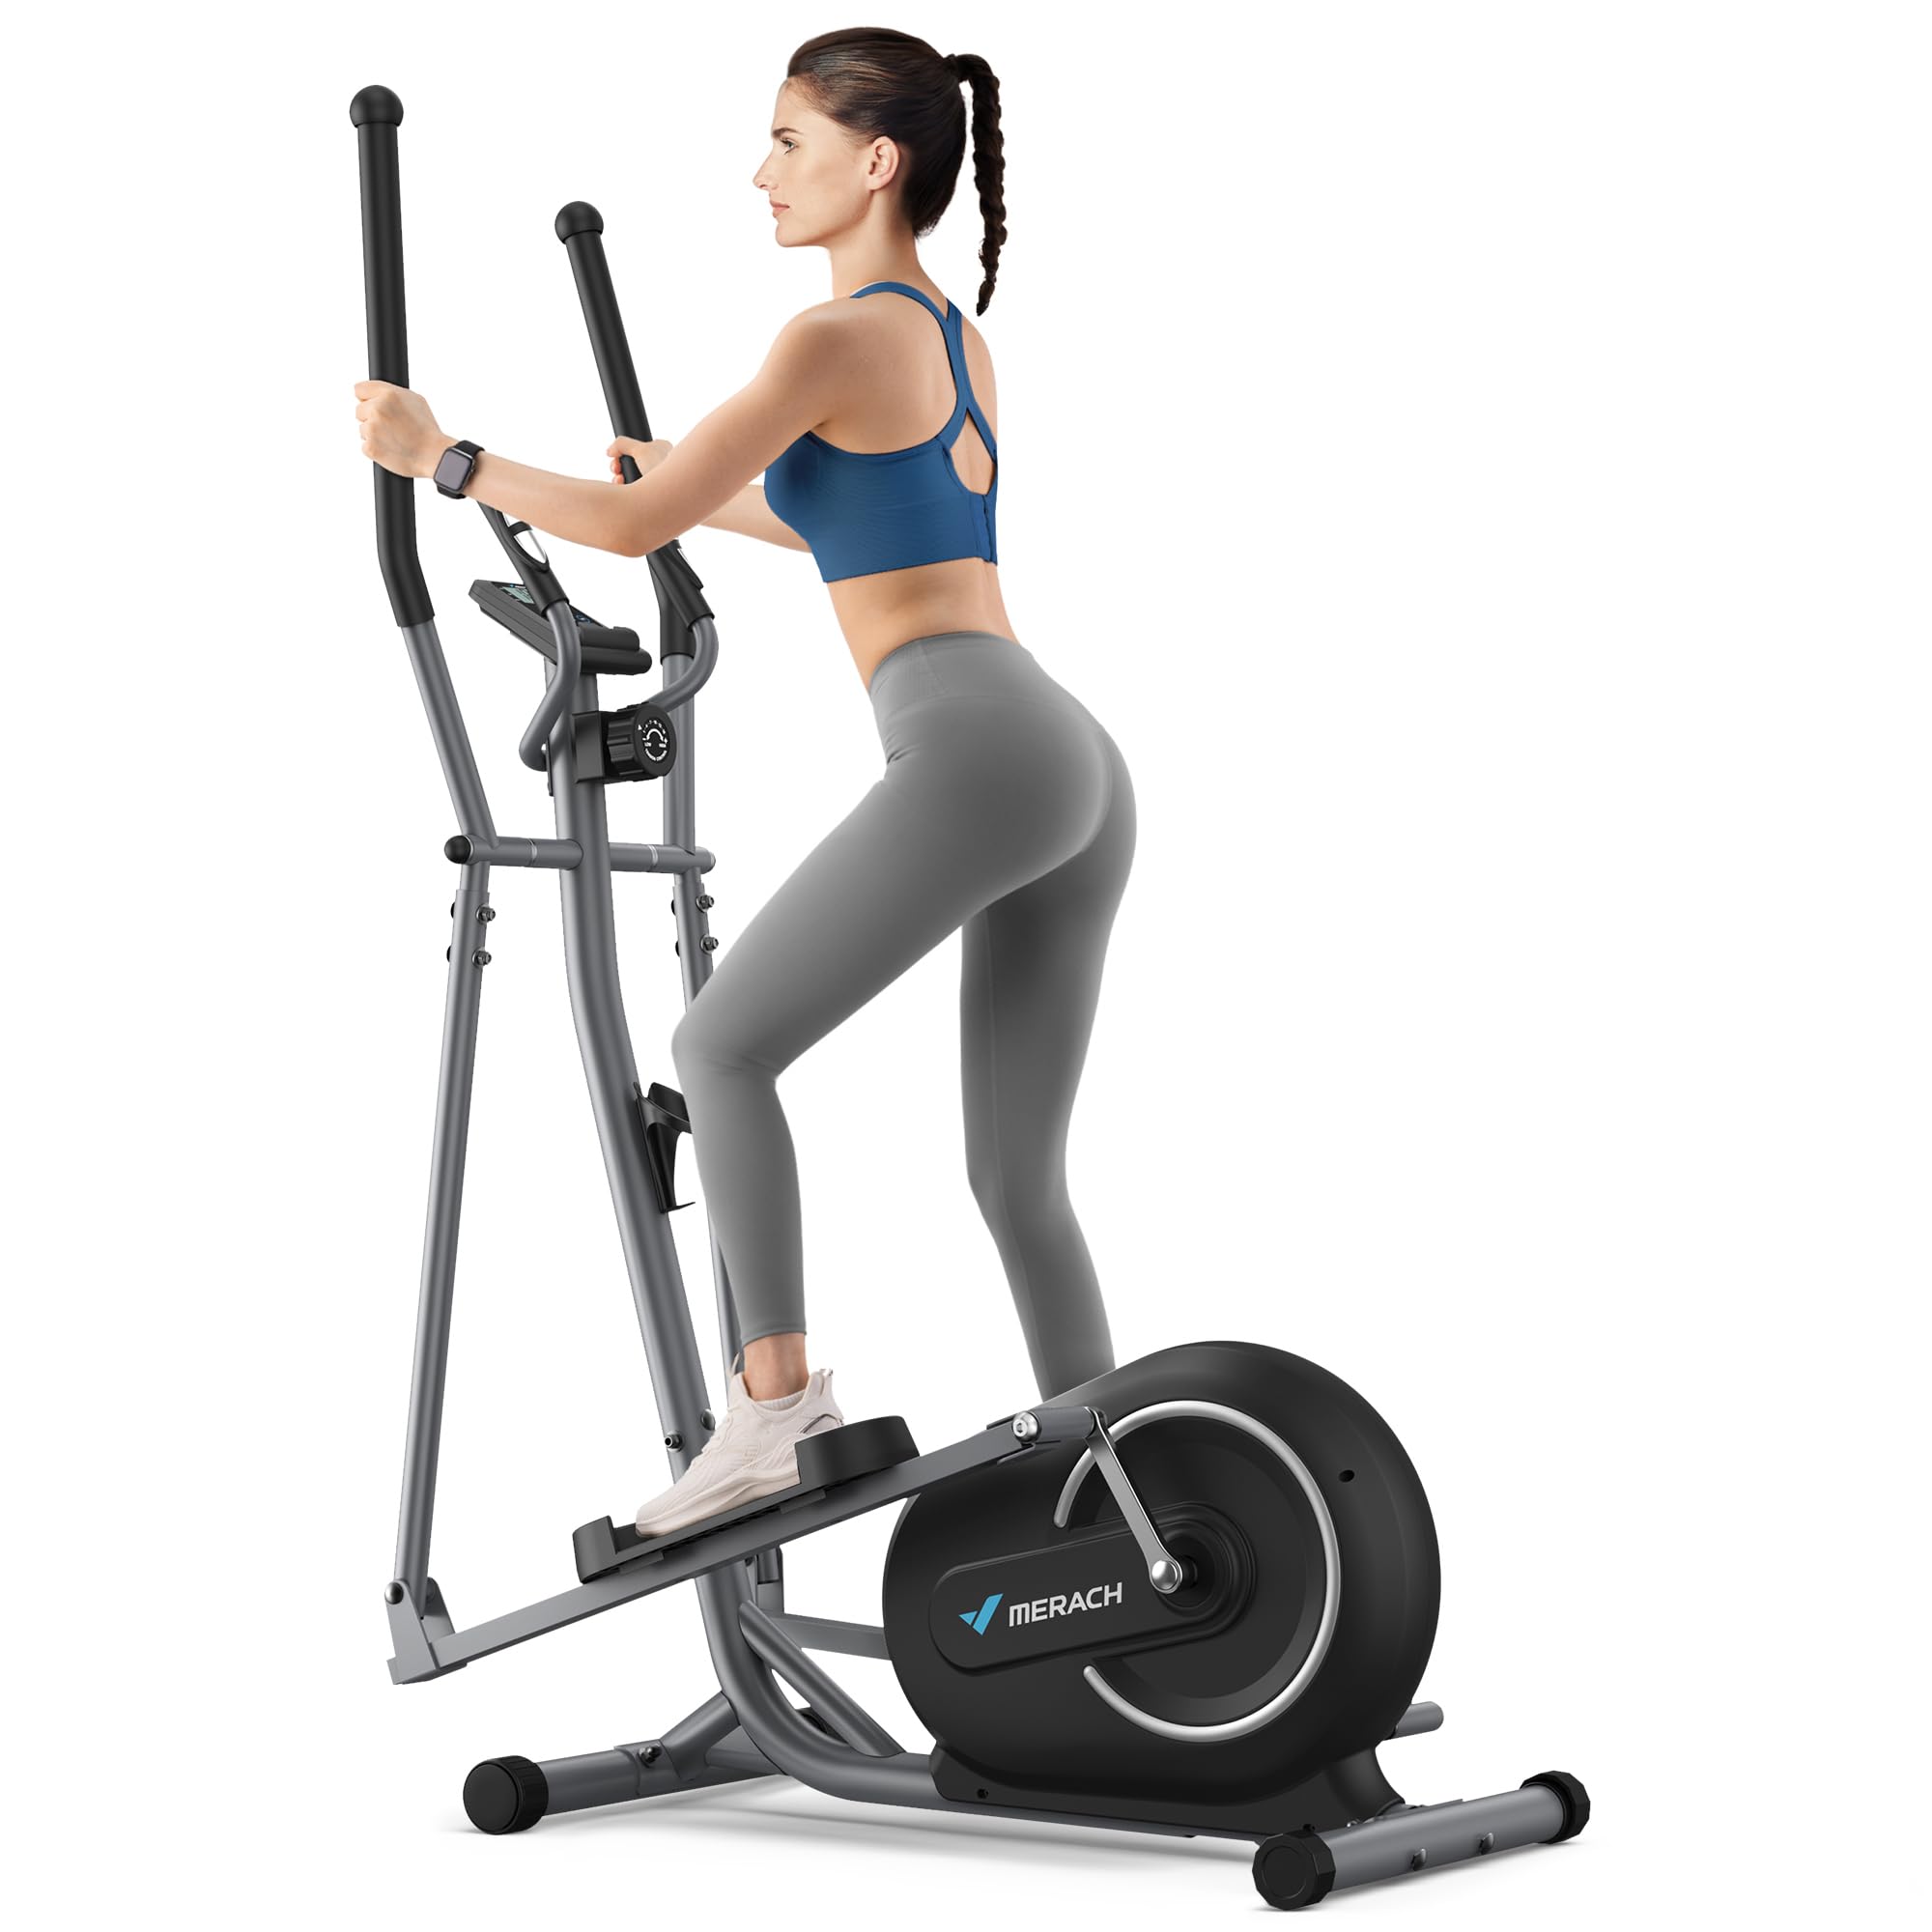 MERACH Elliptical Machine for Home Use Compact Elliptical Training Machines with MERACH App Elliptical Exercise Machine wit